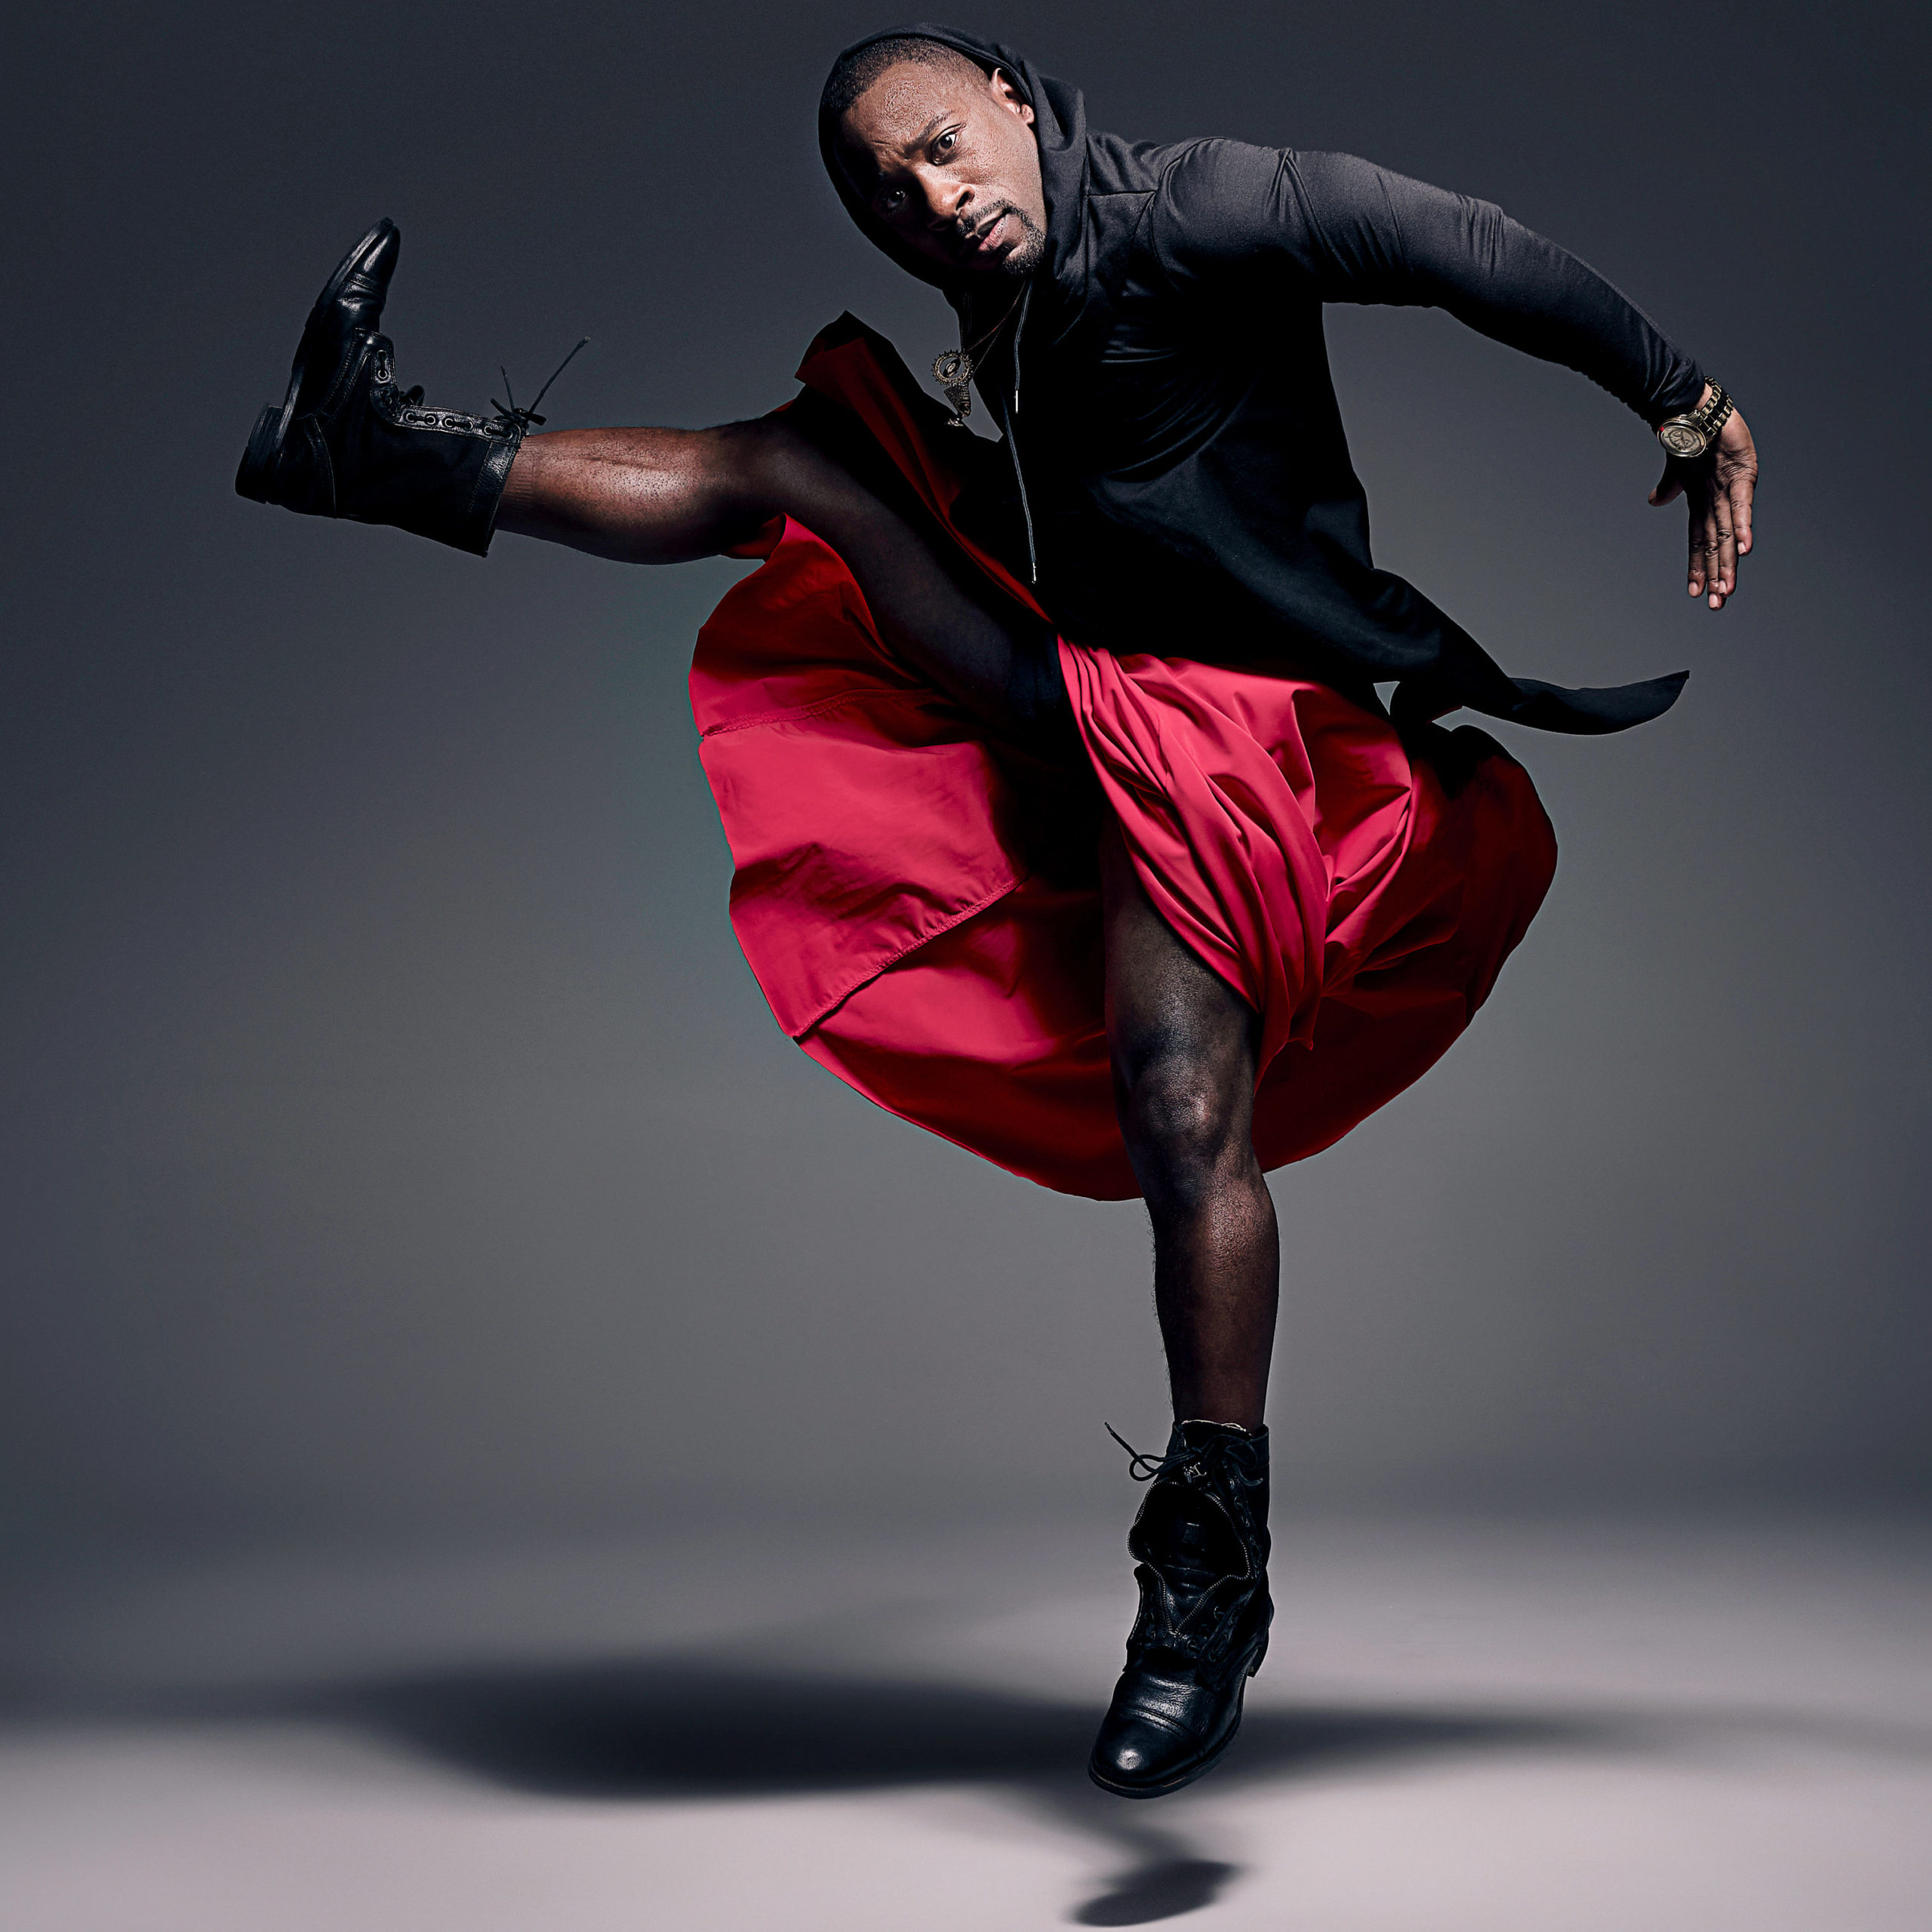 male dancer wearing black zip up and red skirt jumping